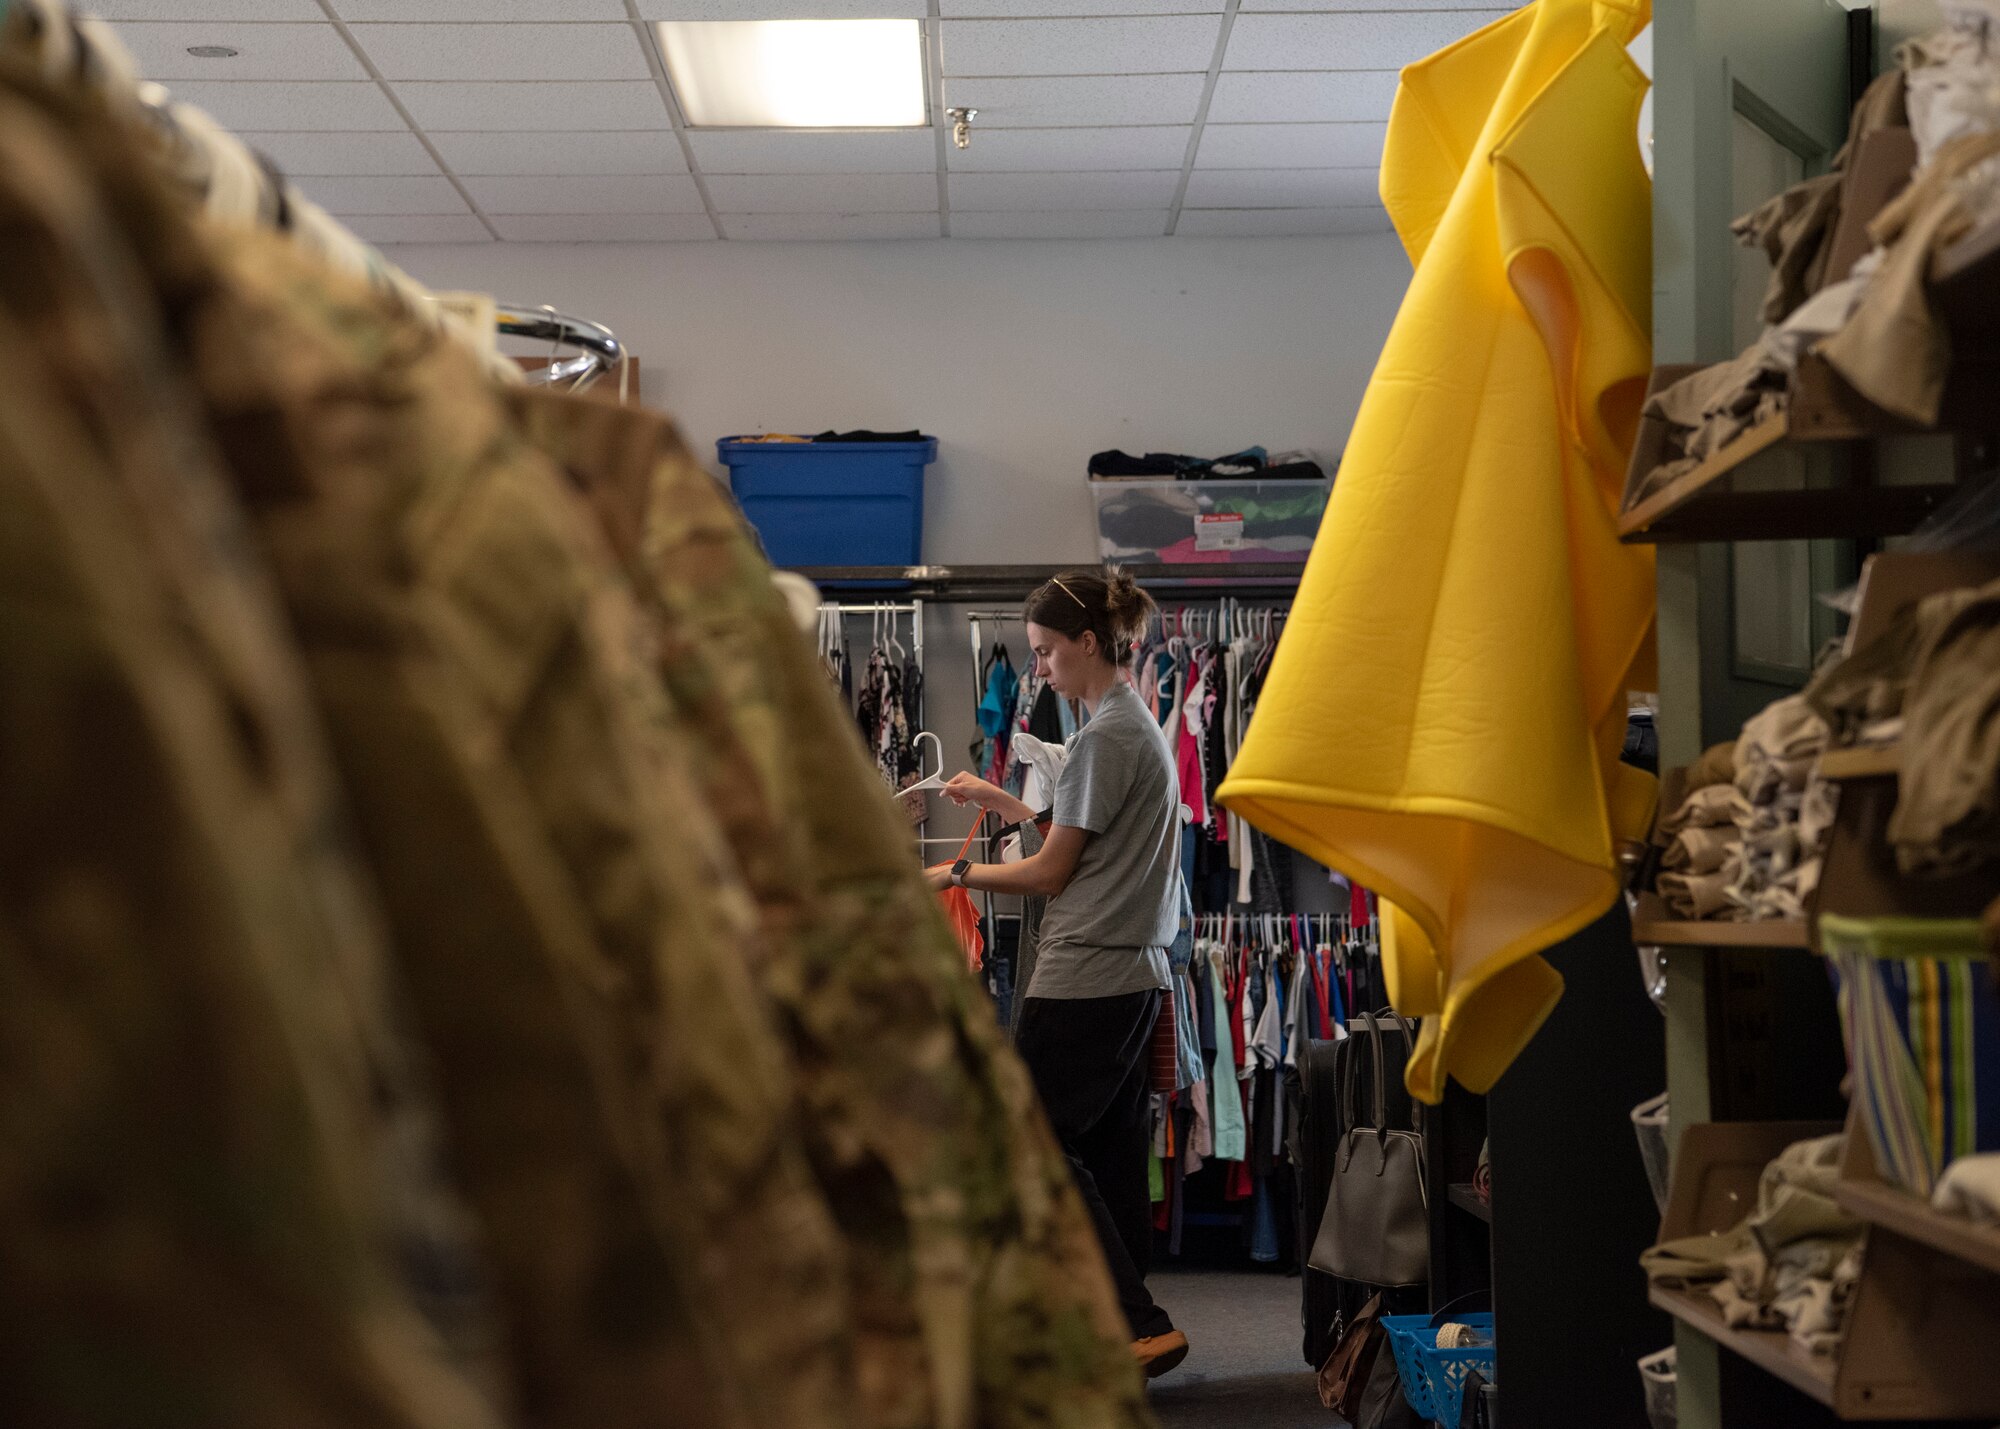 A woman looks through a clothing rack holding civilian clothing.